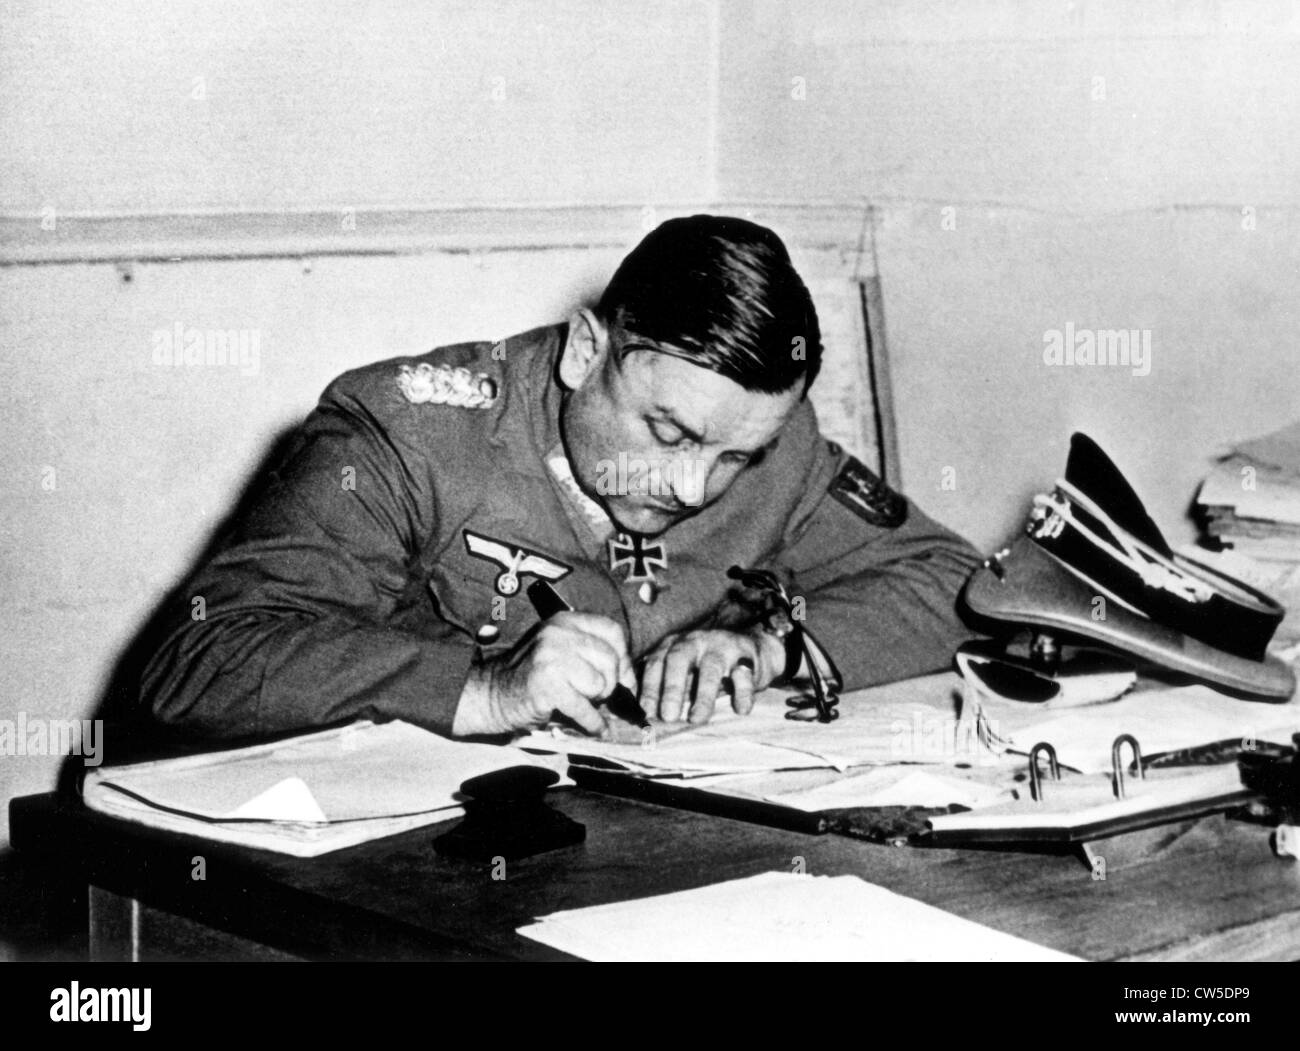 Paris, August 25,1944. German General von Choltitz writing a note to get his personal belongings left at the hotel Meurice back. Stock Photo